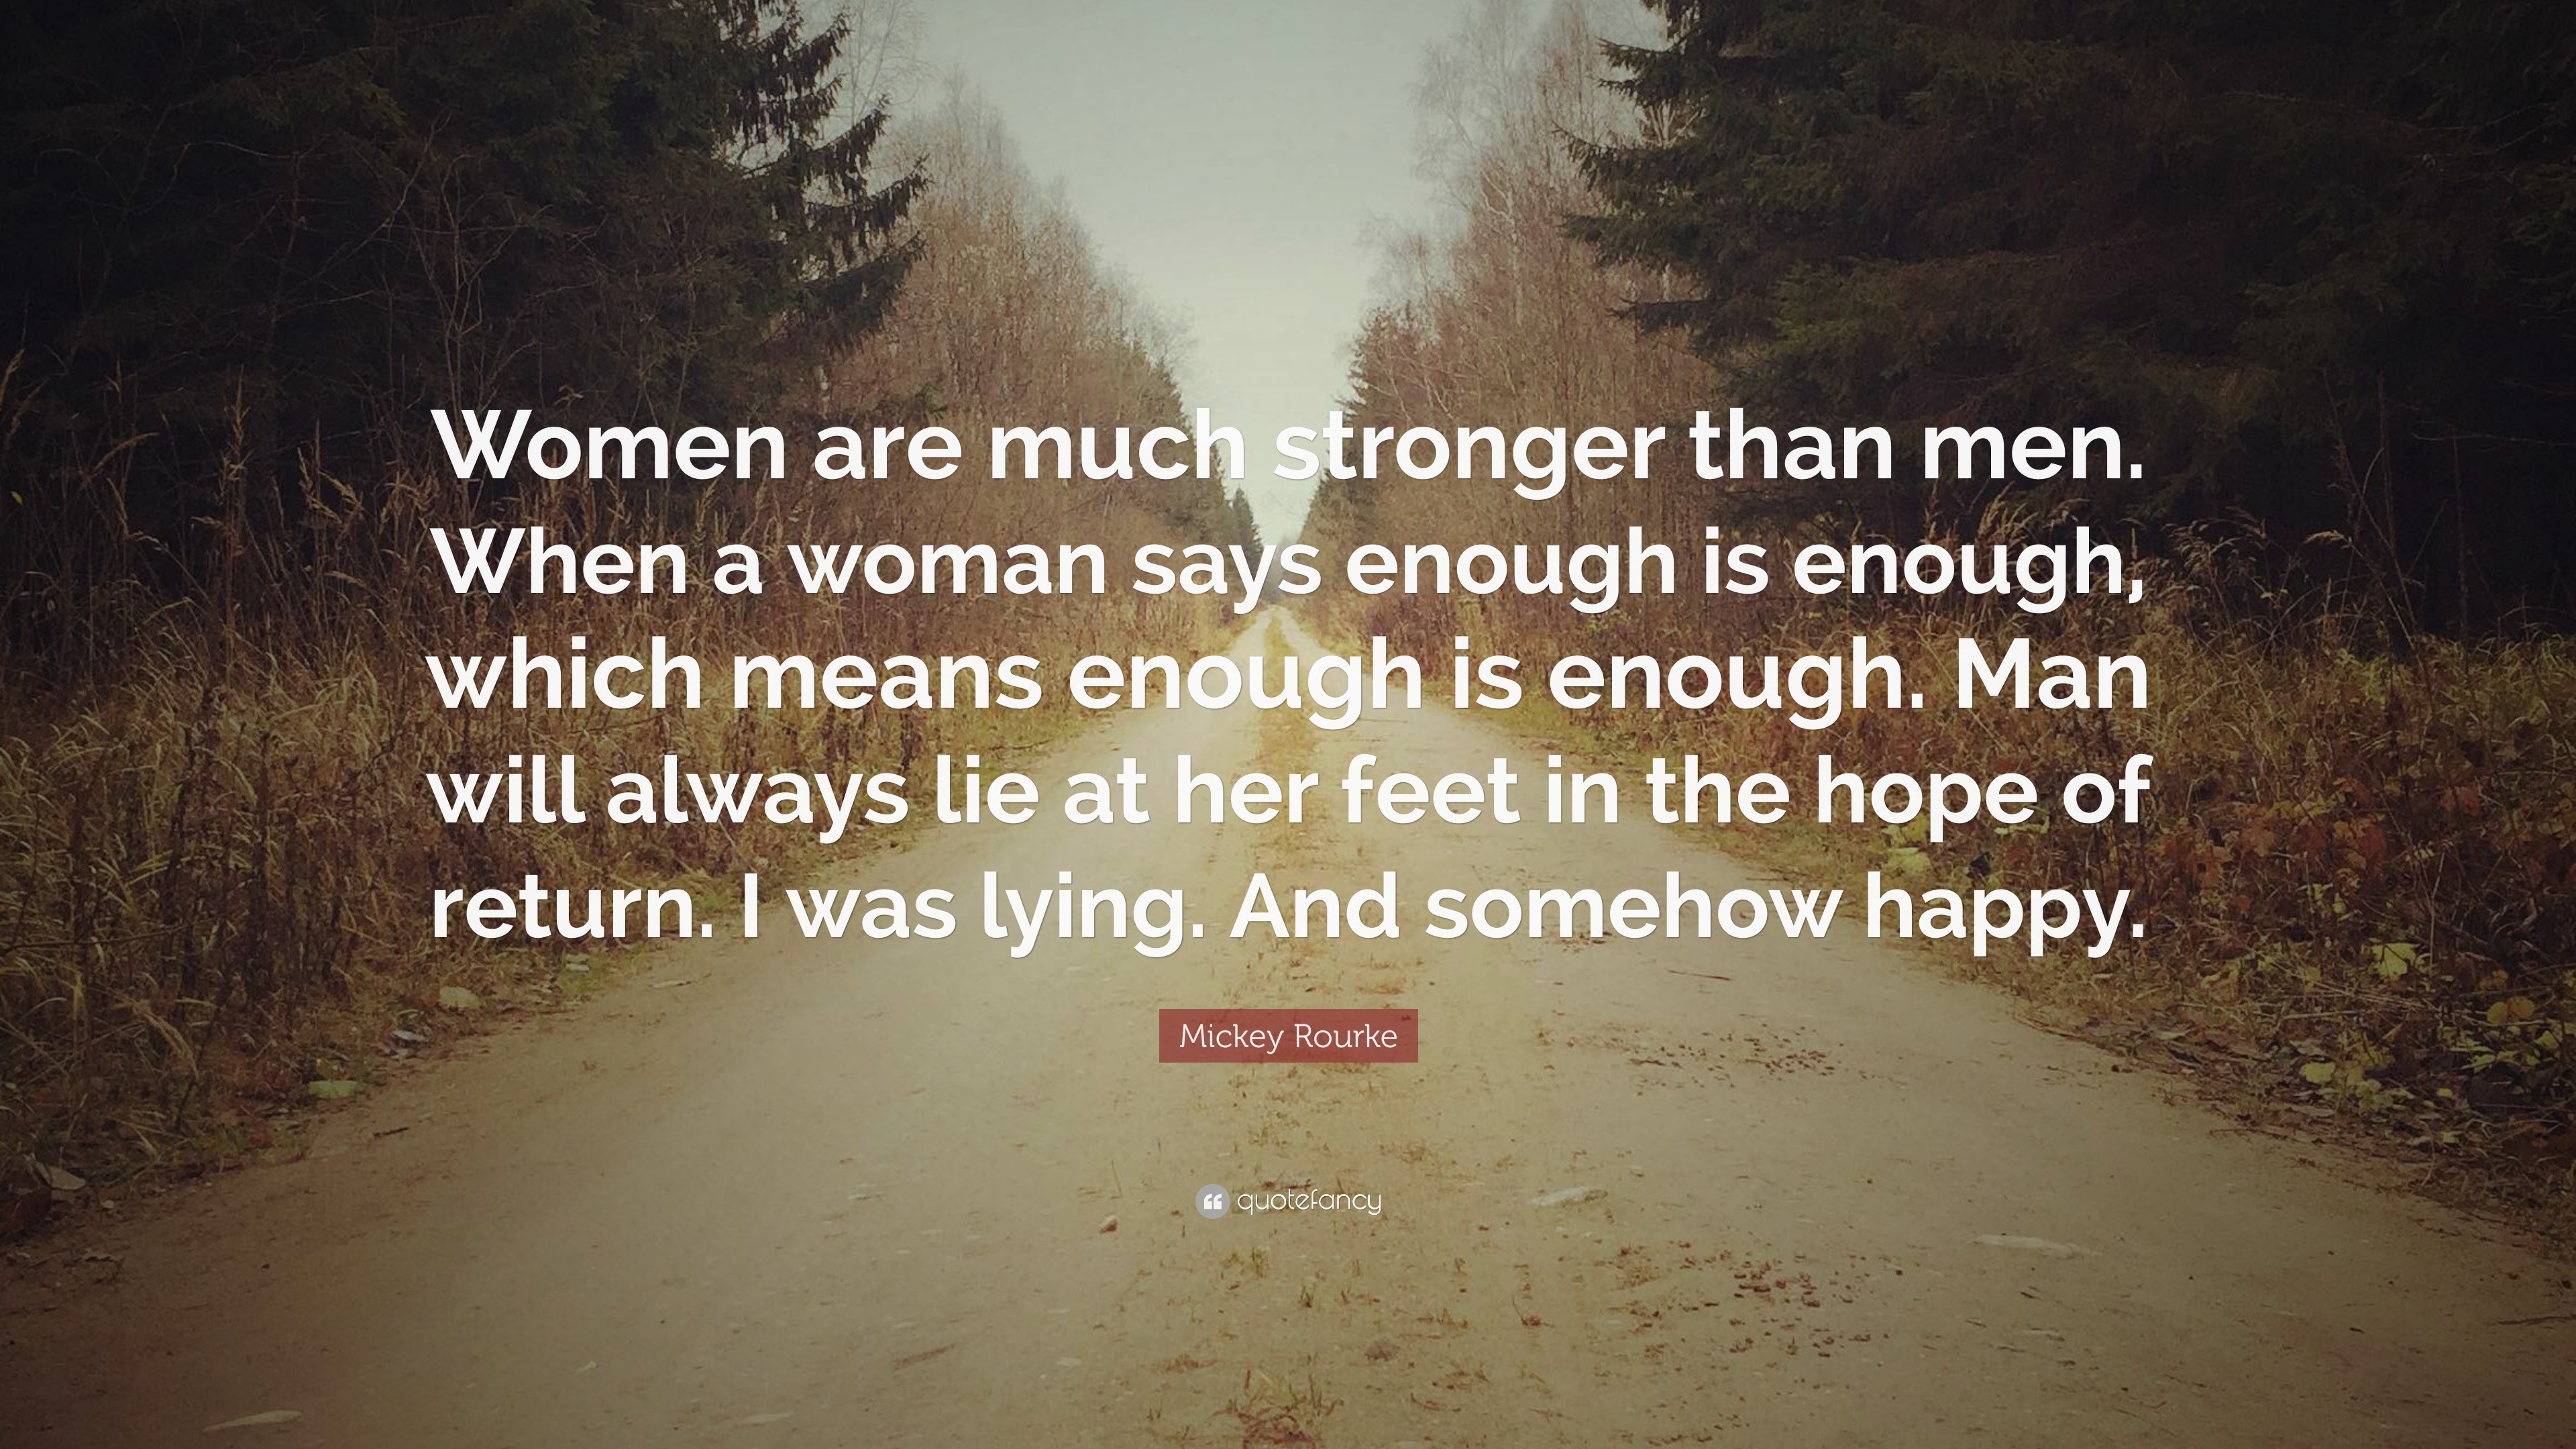 Mickey Rourke Quote: “Women are much stronger than men. When a woman ...